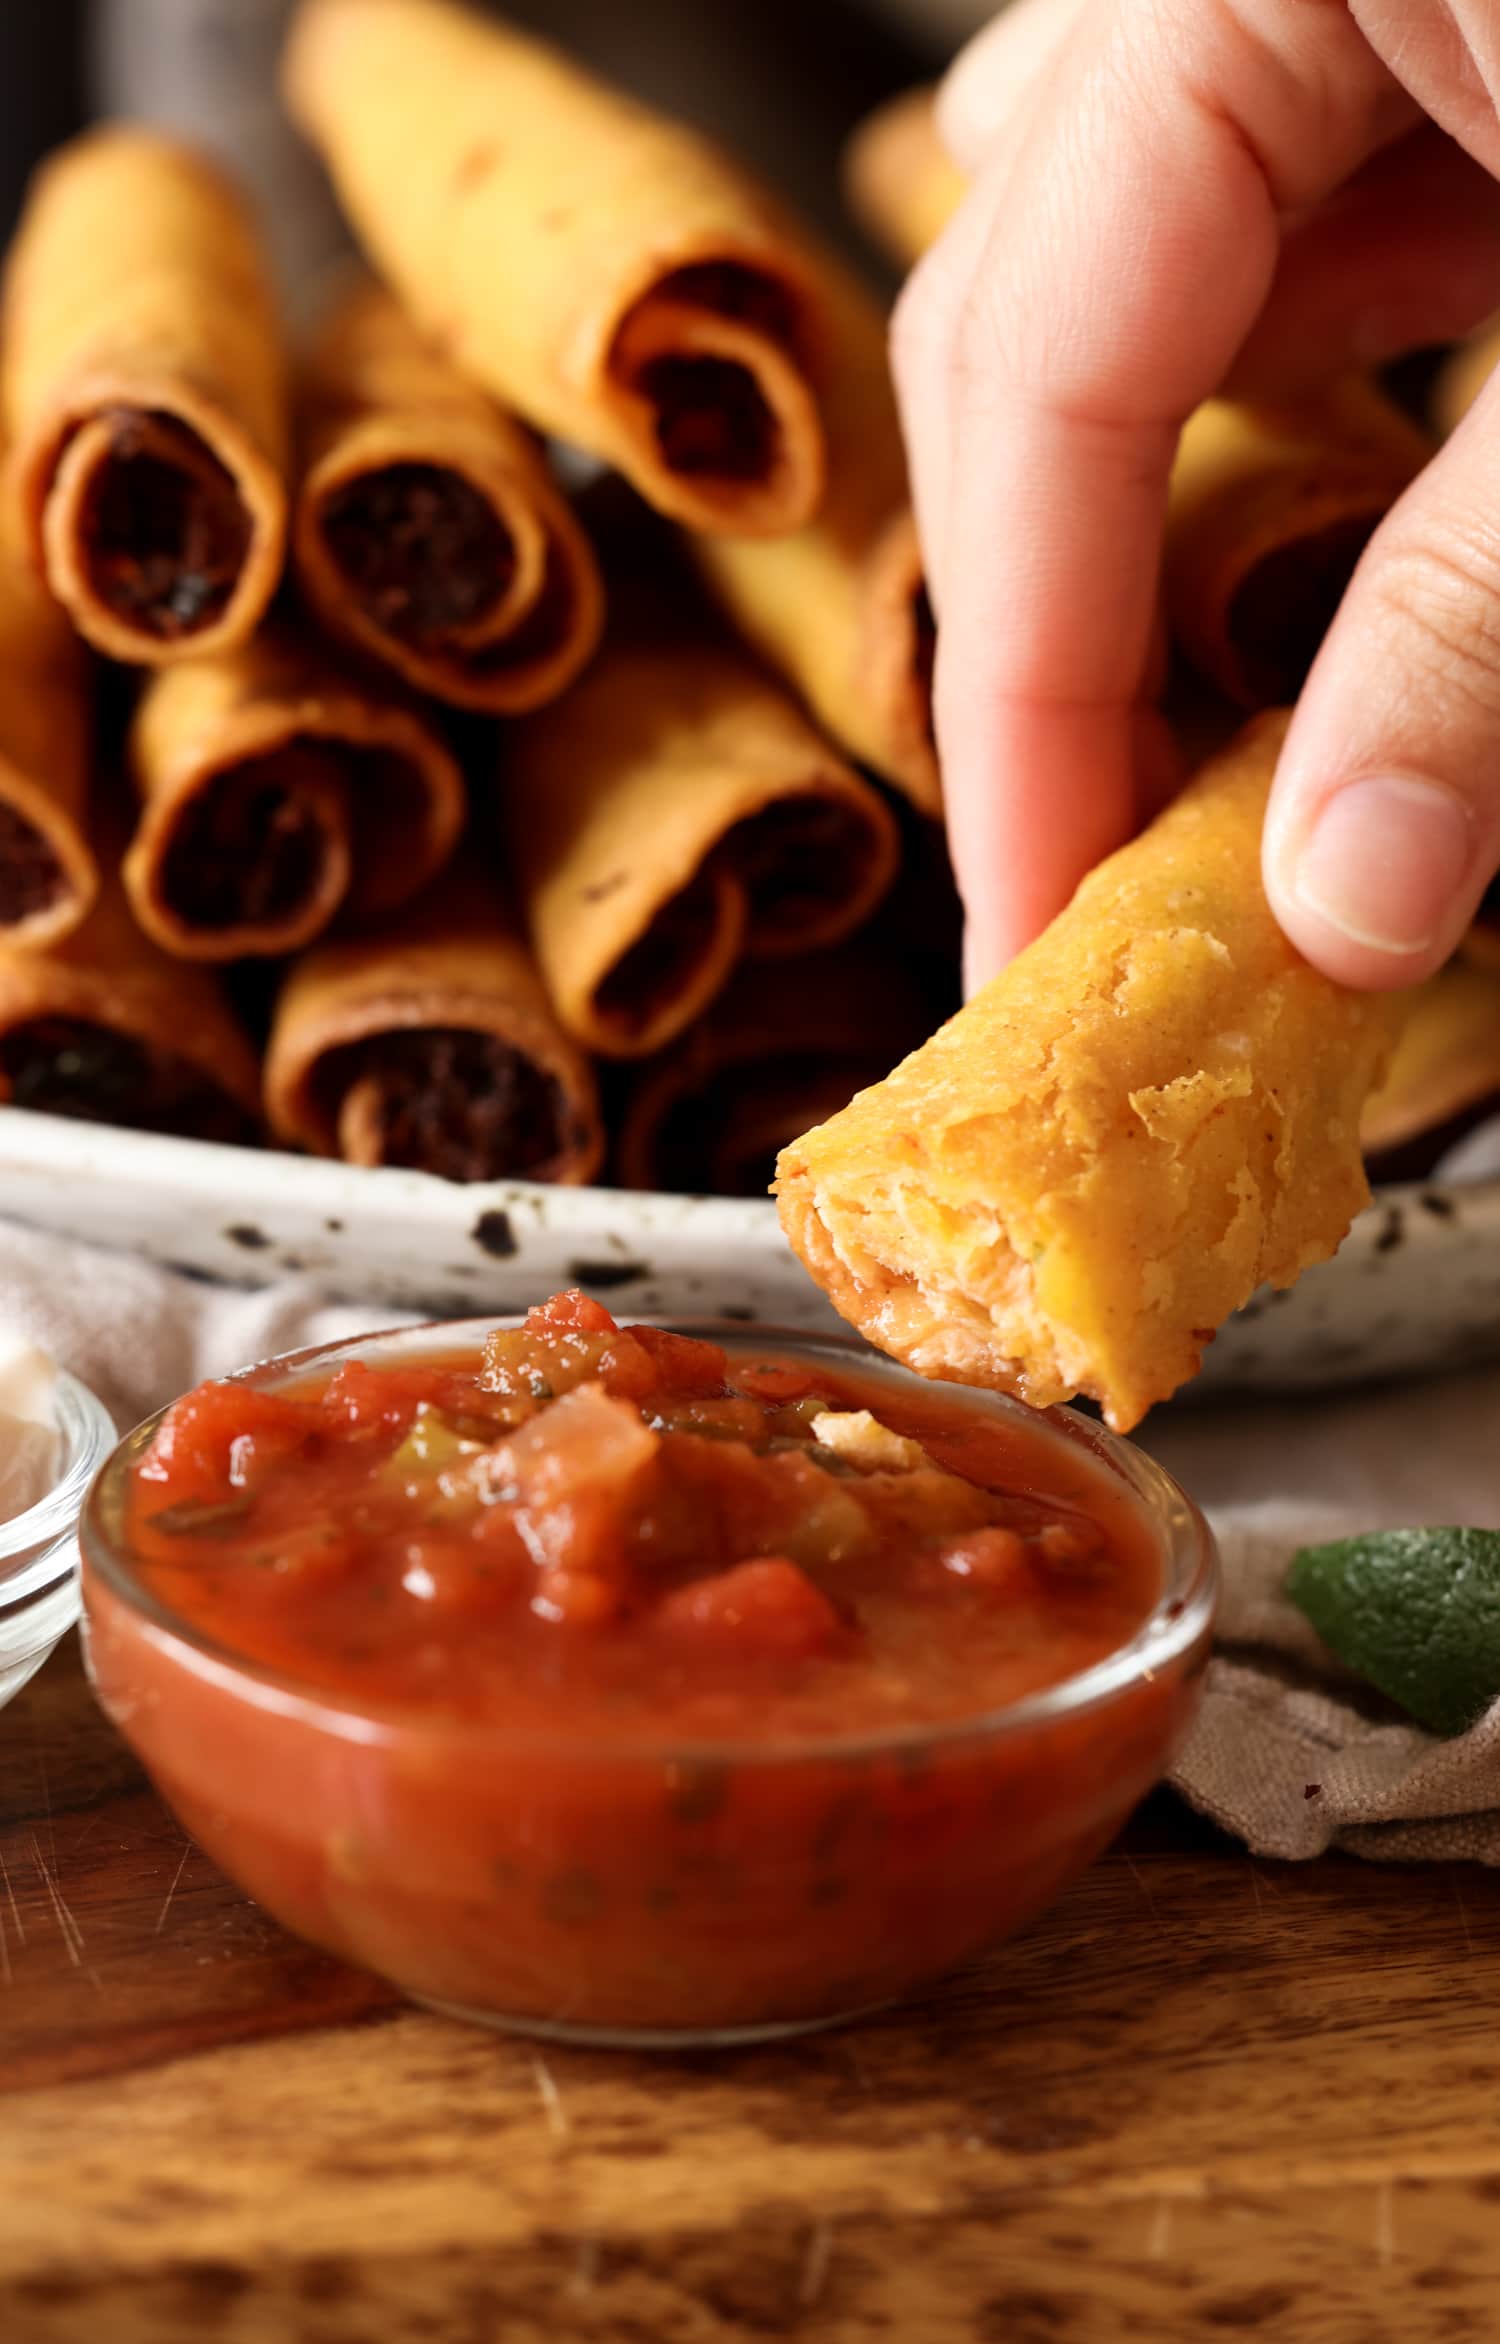 a taquito being dipped in salsa